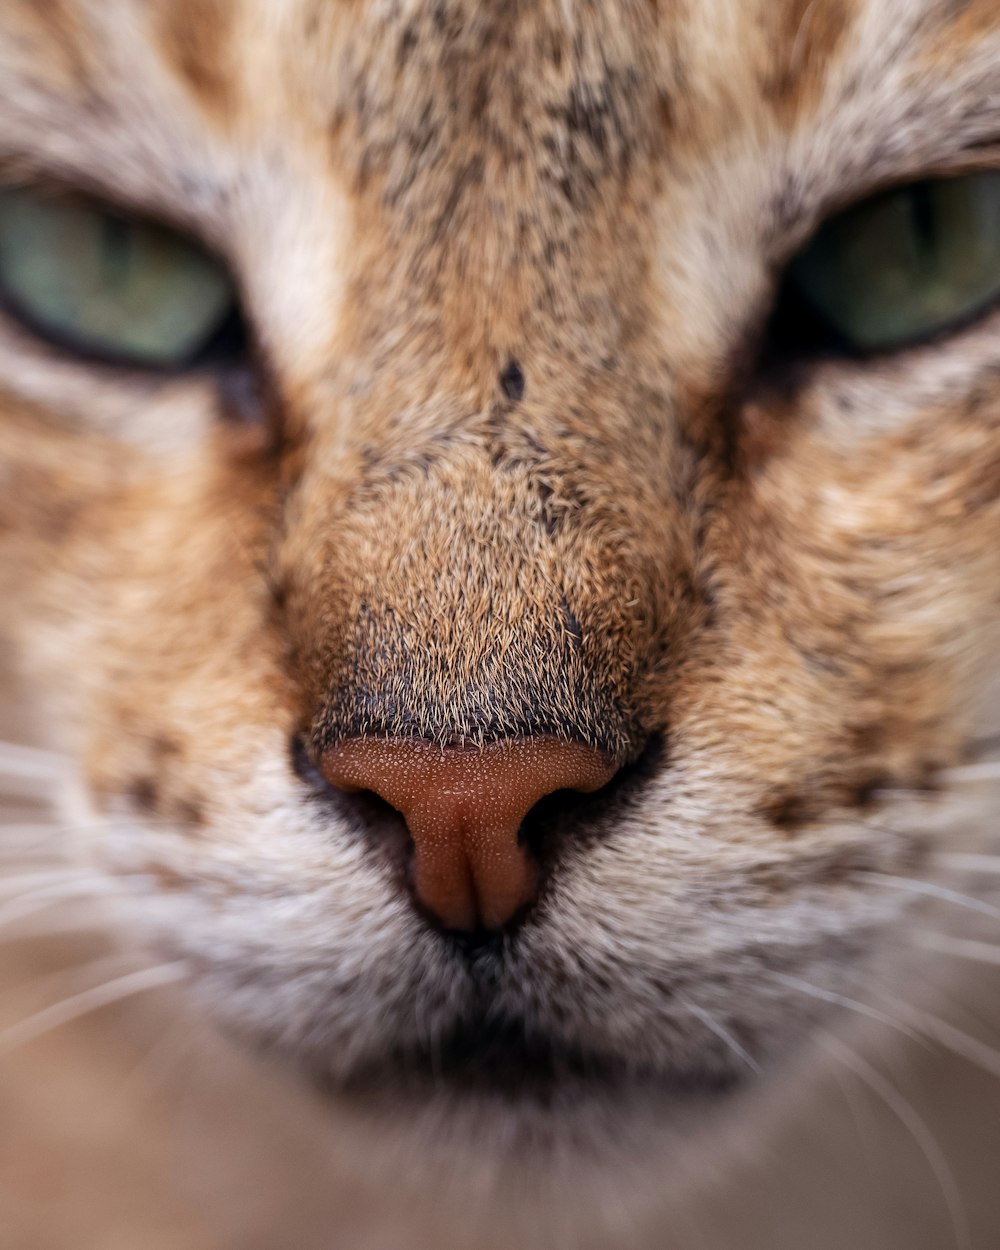 a close up of a cat's face with green eyes